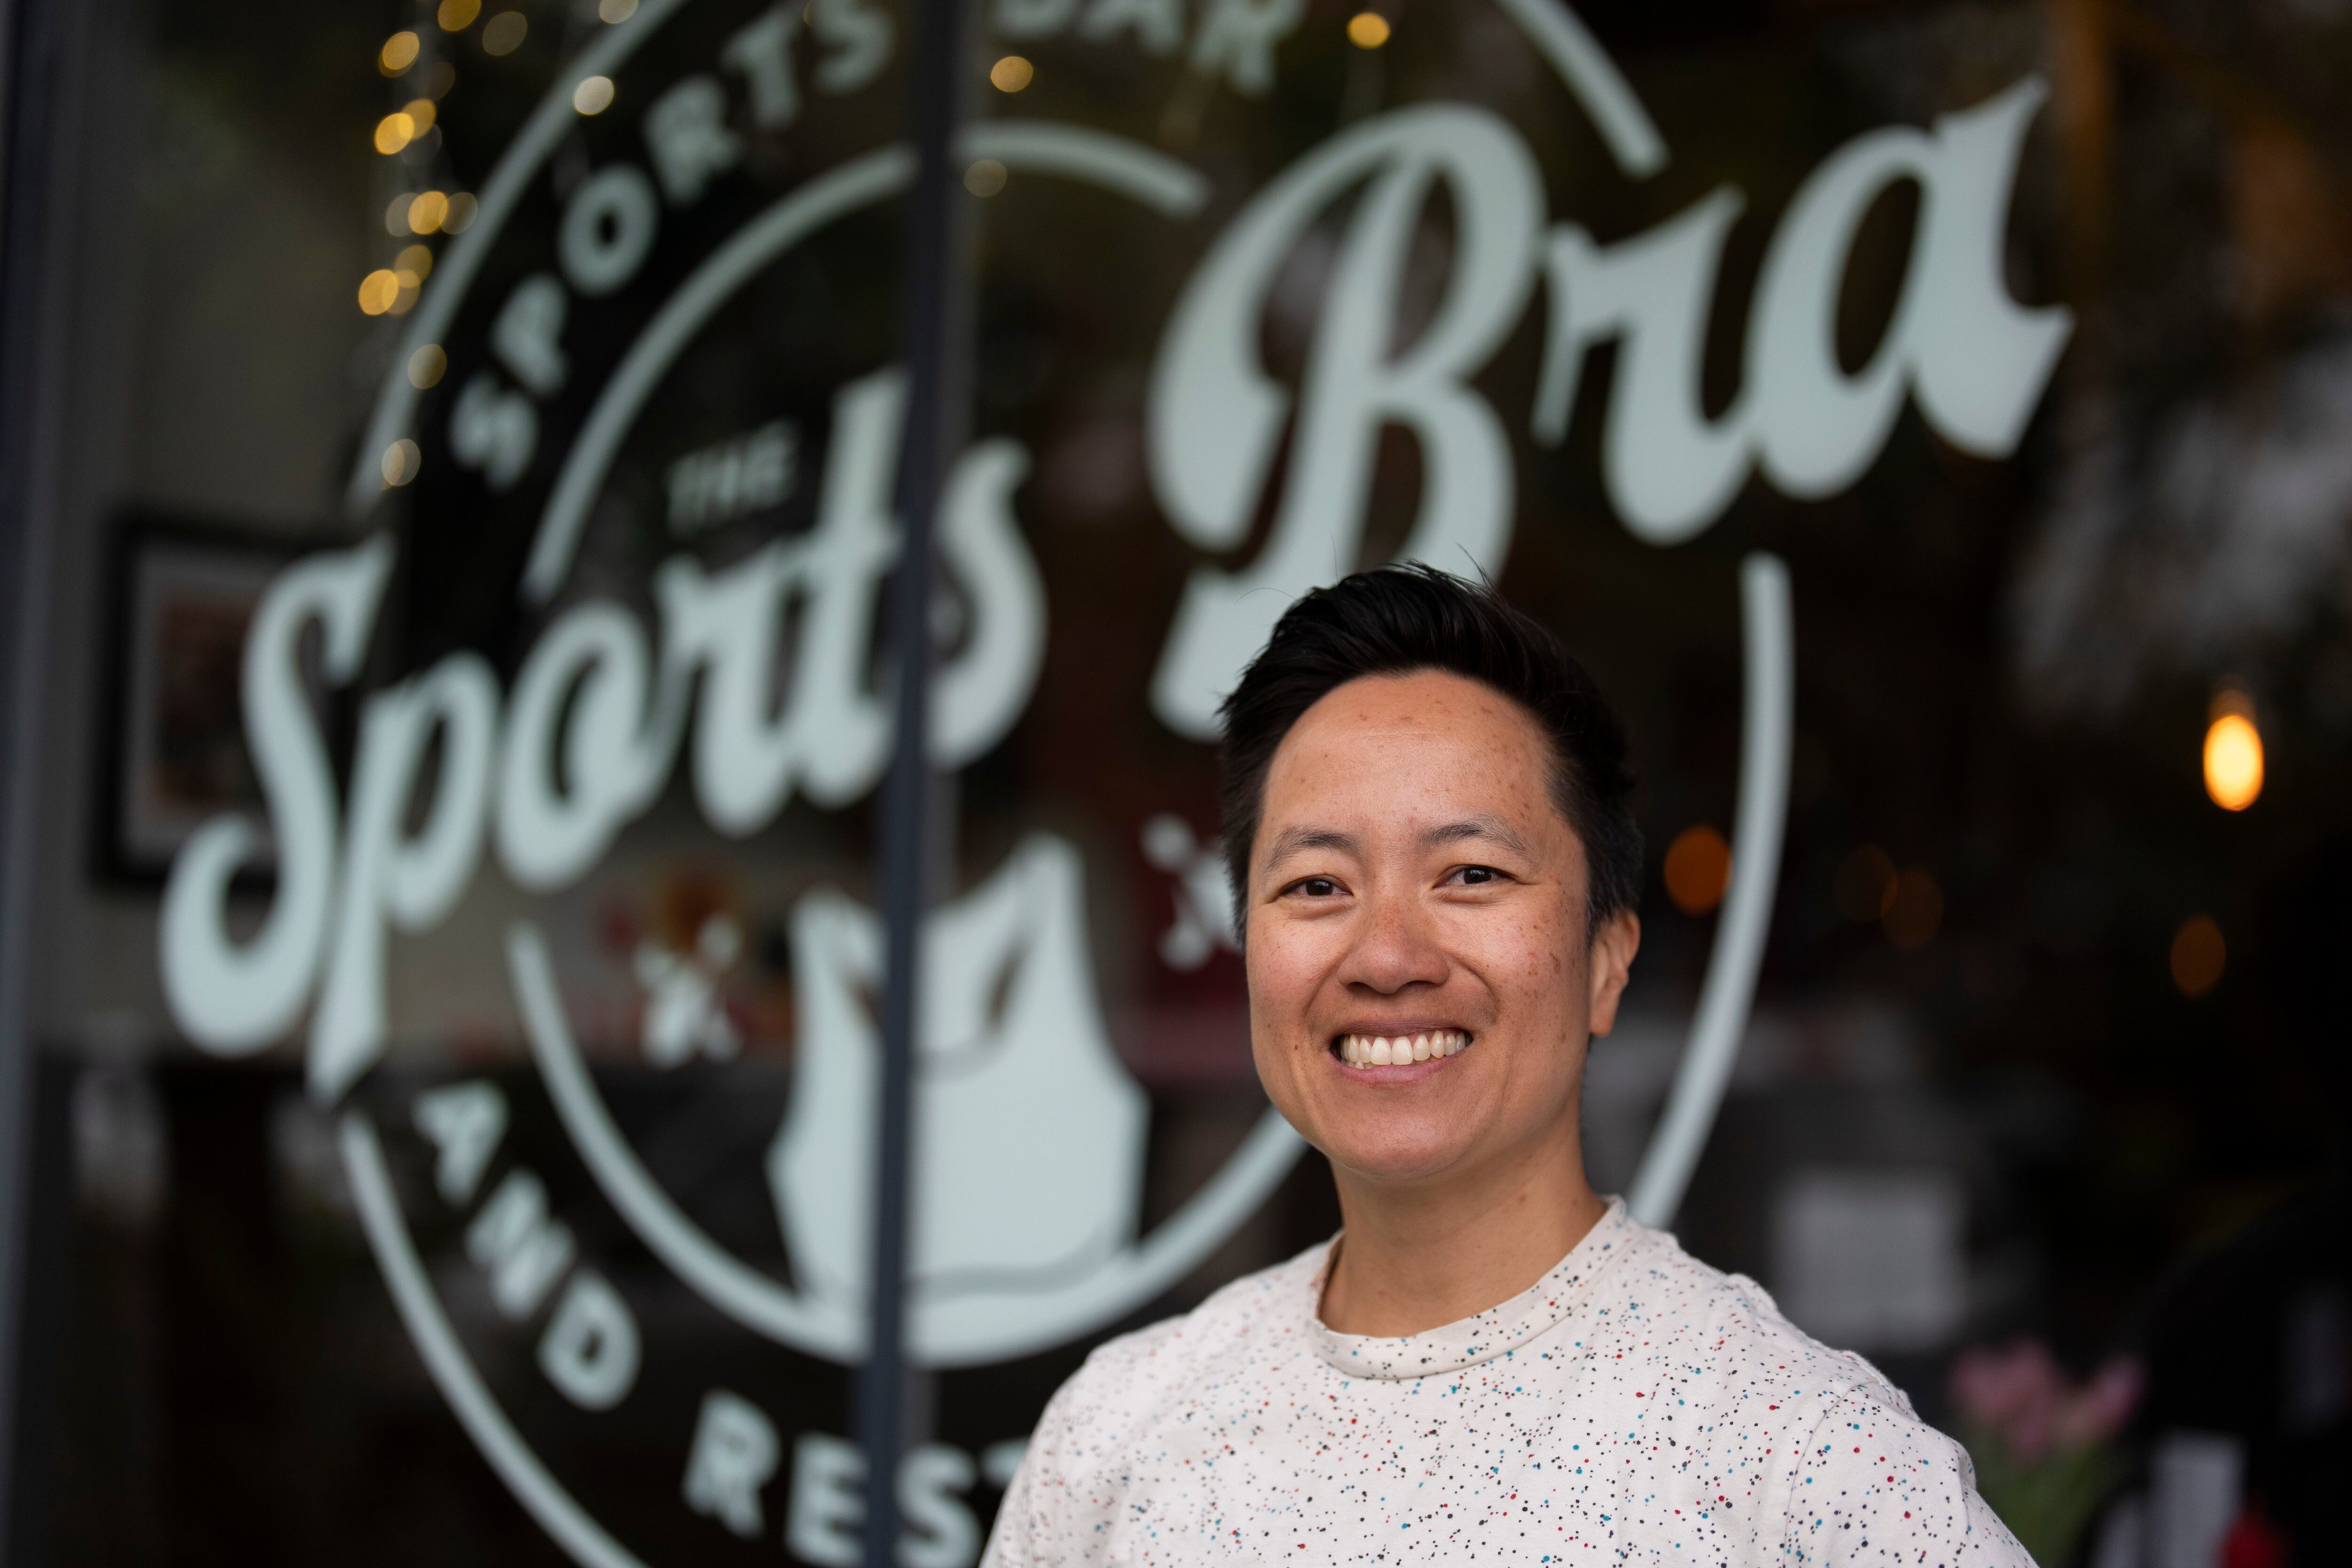 The Sports Bra founder and CEO Jenny Nguyen poses for a photo at the sports bar on Thursday, April 25, 2024, in Portland, Ore.